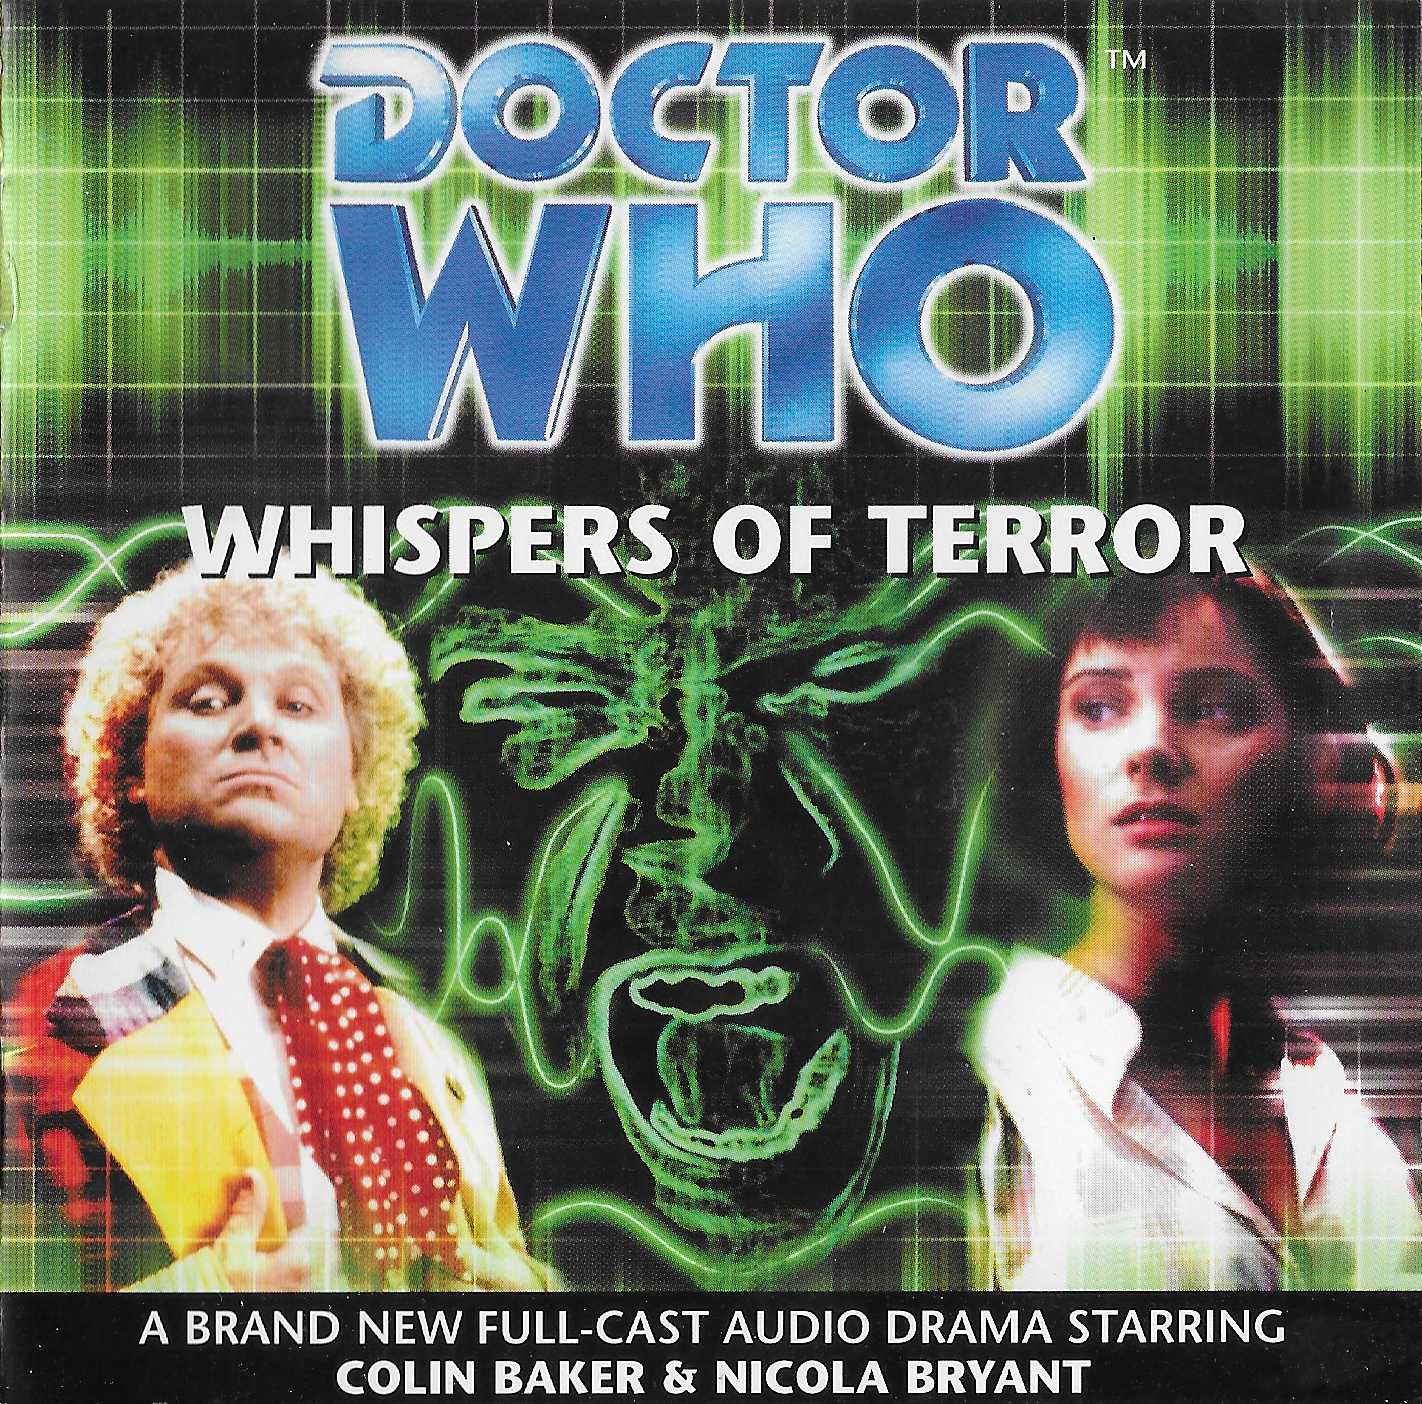 Picture of BFPDWCD 6ZA Doctor Who - Whispers of terror by artist Justin Richards from the BBC records and Tapes library